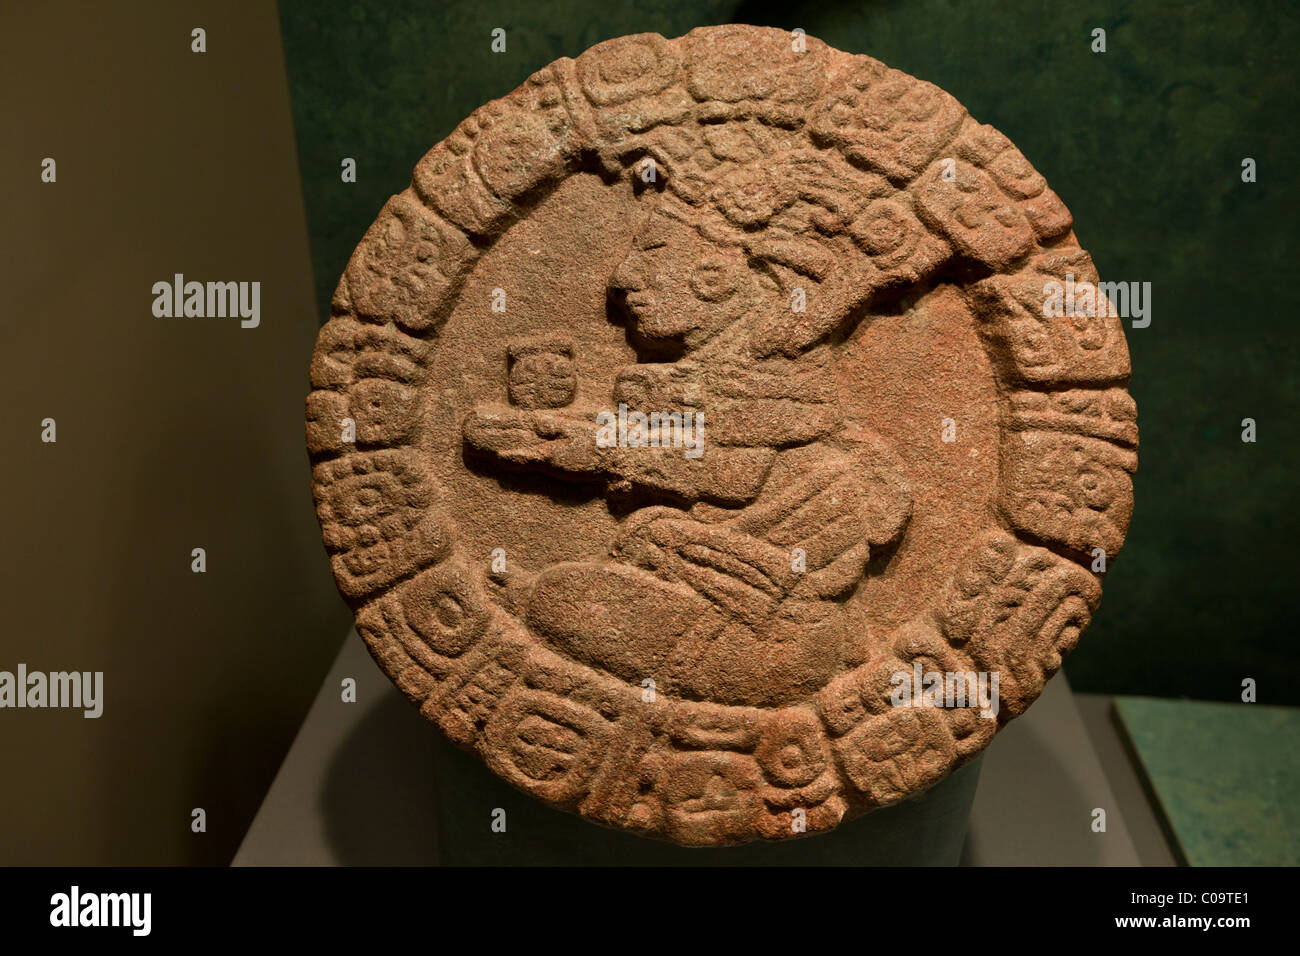 Maya ballcourt marker disc with priest making an offering from Tonina, Chiapas. National Museum of Anthropology, Mexico City. Stock Photo